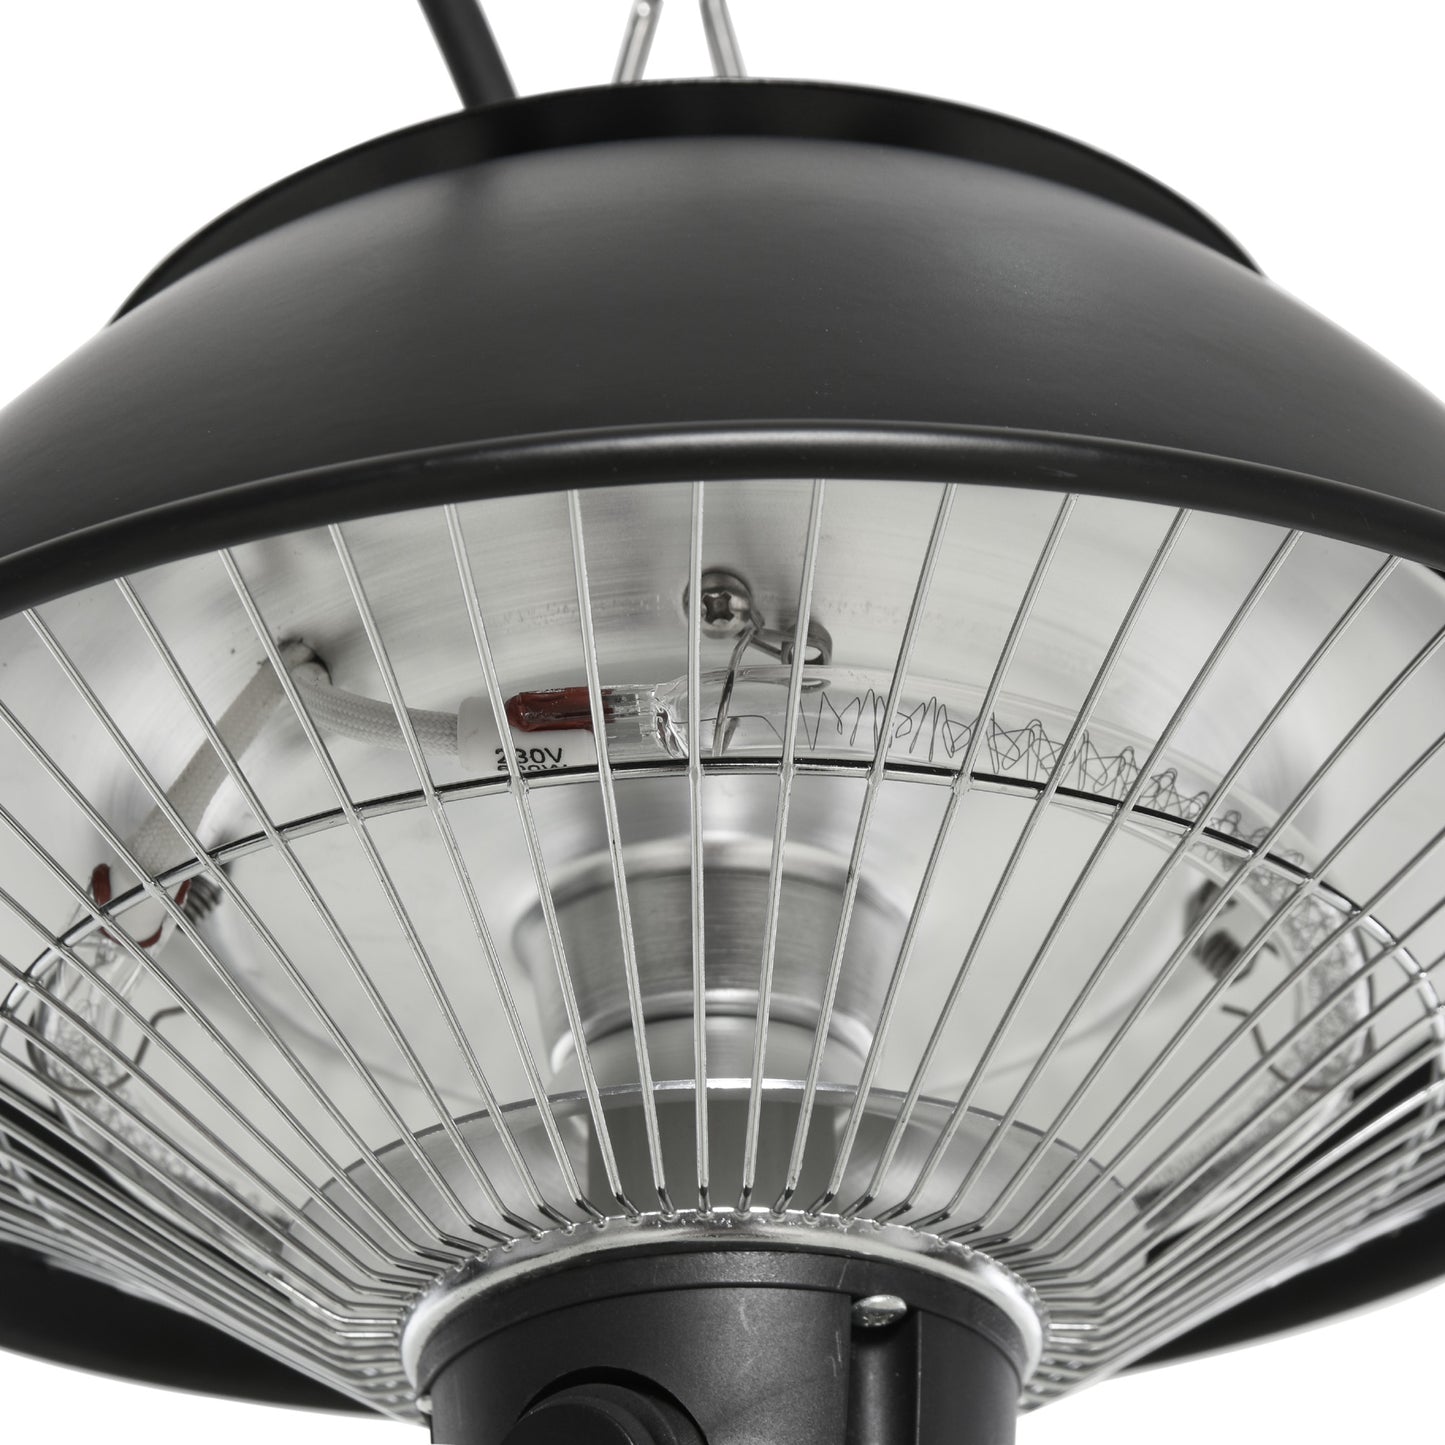 Outsunny Electric Heater, 600W Ceiling Hanging Halogen Light, with Adjustable Hook Chain, Black Aluminium Frame